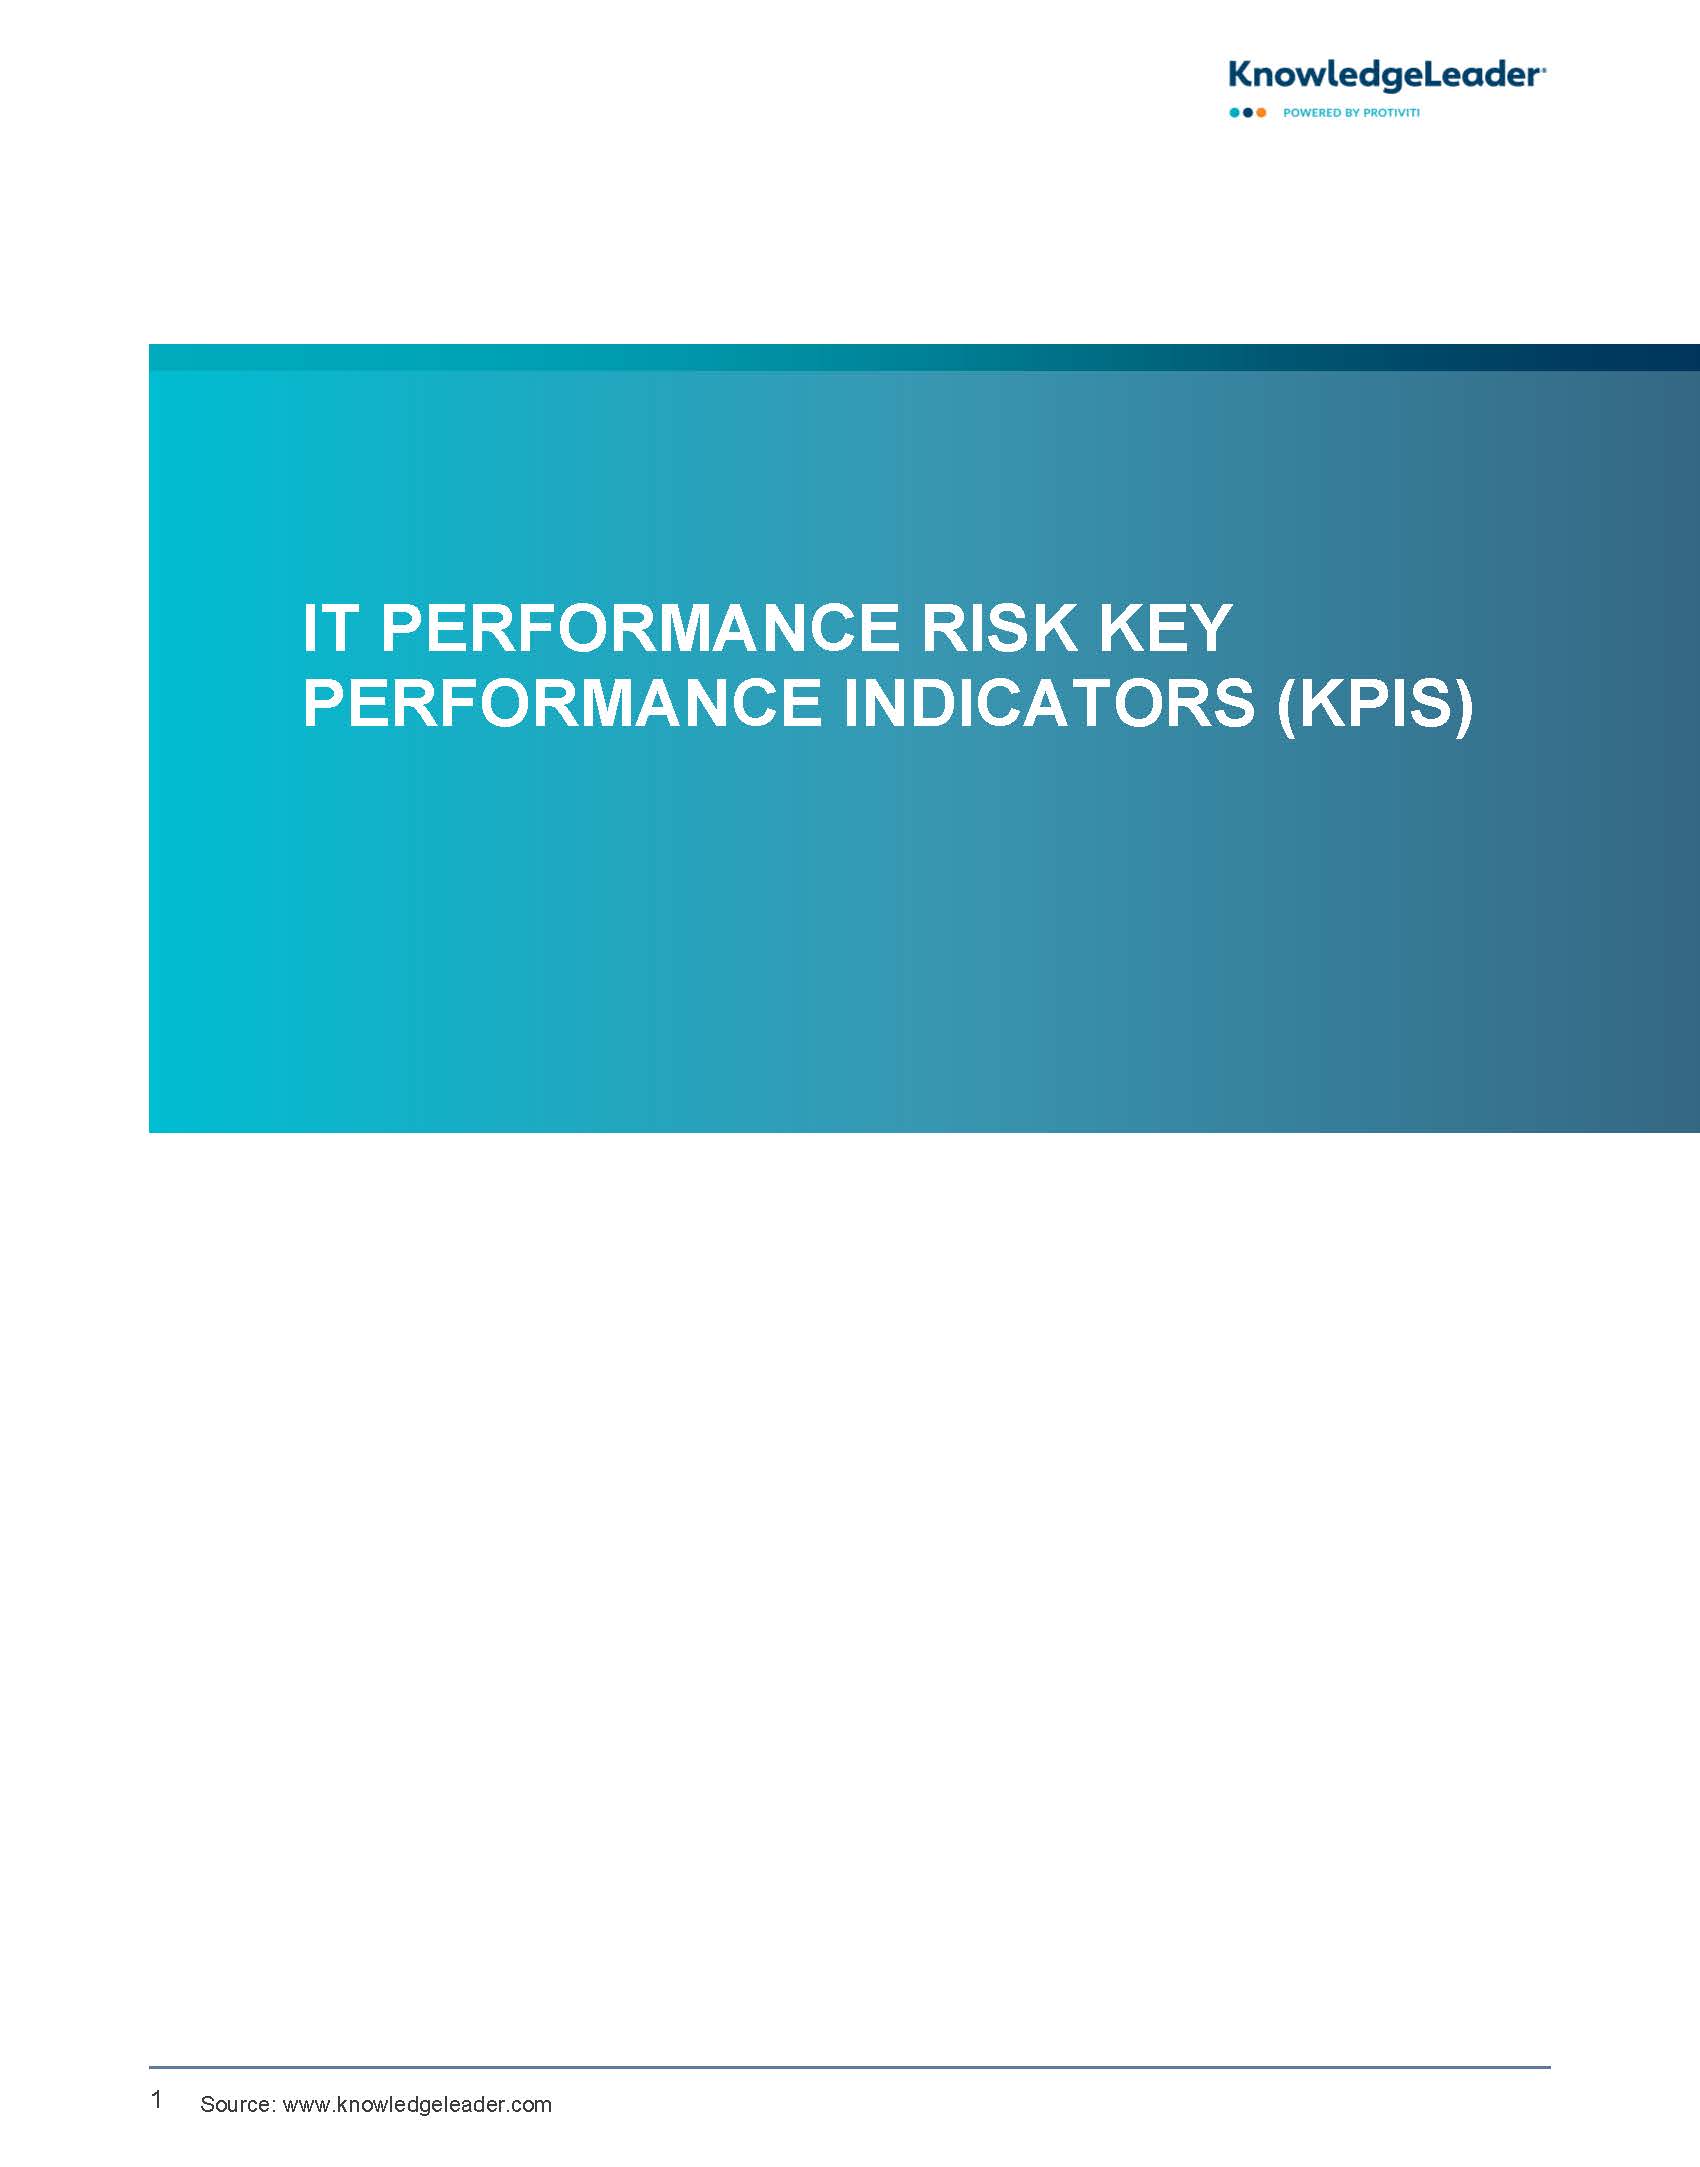 Screenshot of the first page of IT Performance Risk Key Performance Indicators (KPIs).